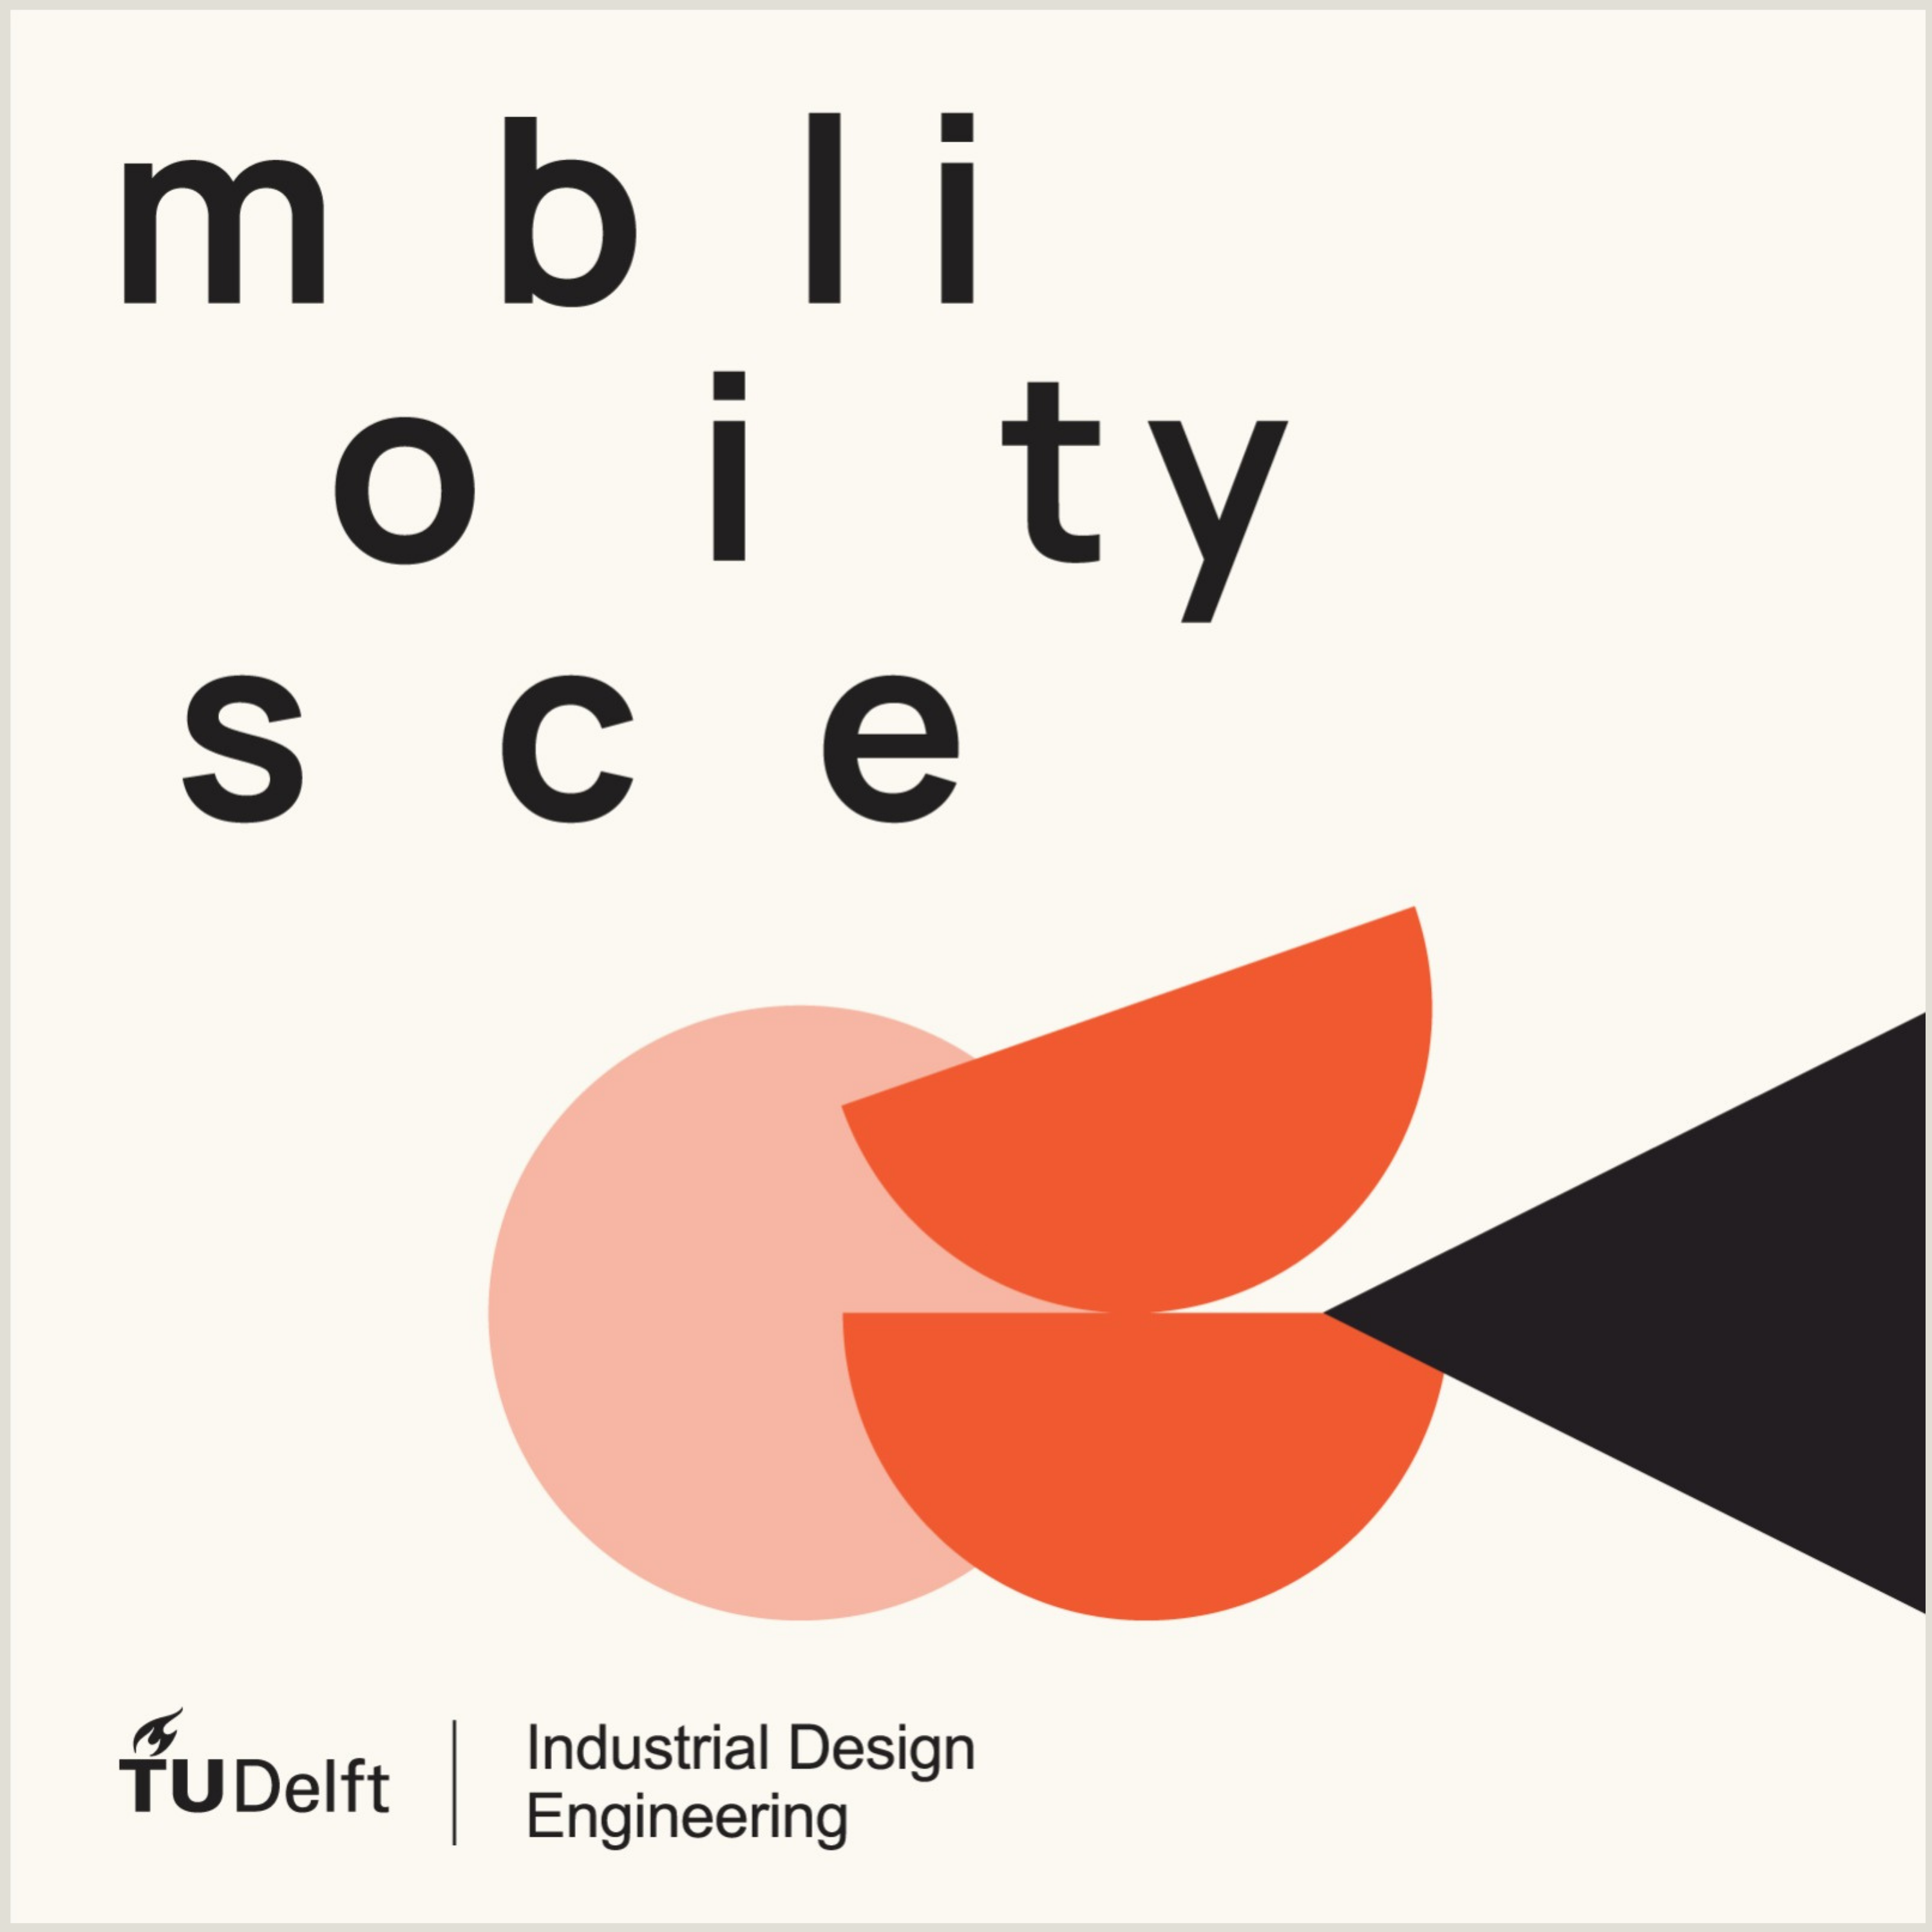 Mobility Society podcast cover which links to Spotify channel